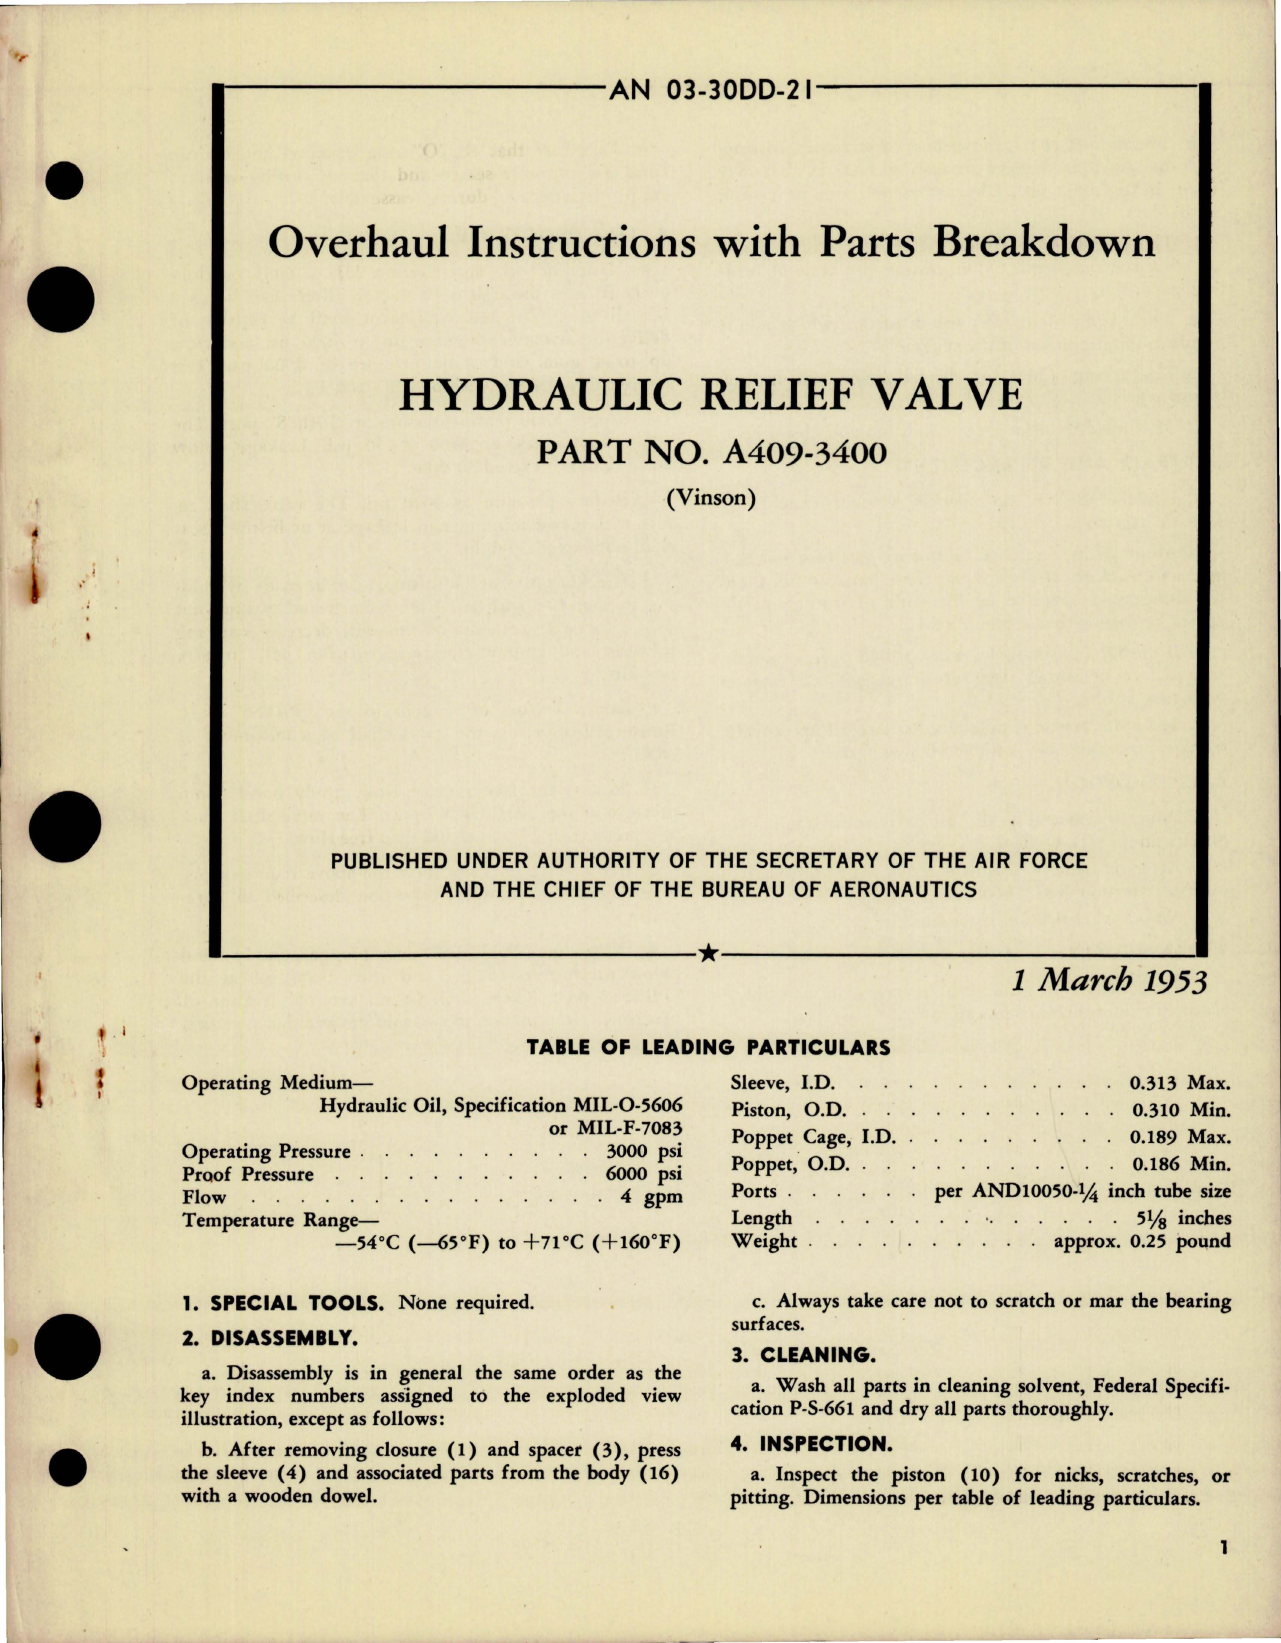 Sample page 1 from AirCorps Library document: Overhaul Instructions with Parts Breakdown for Hydraulic Relief Valve - Part A409-3400